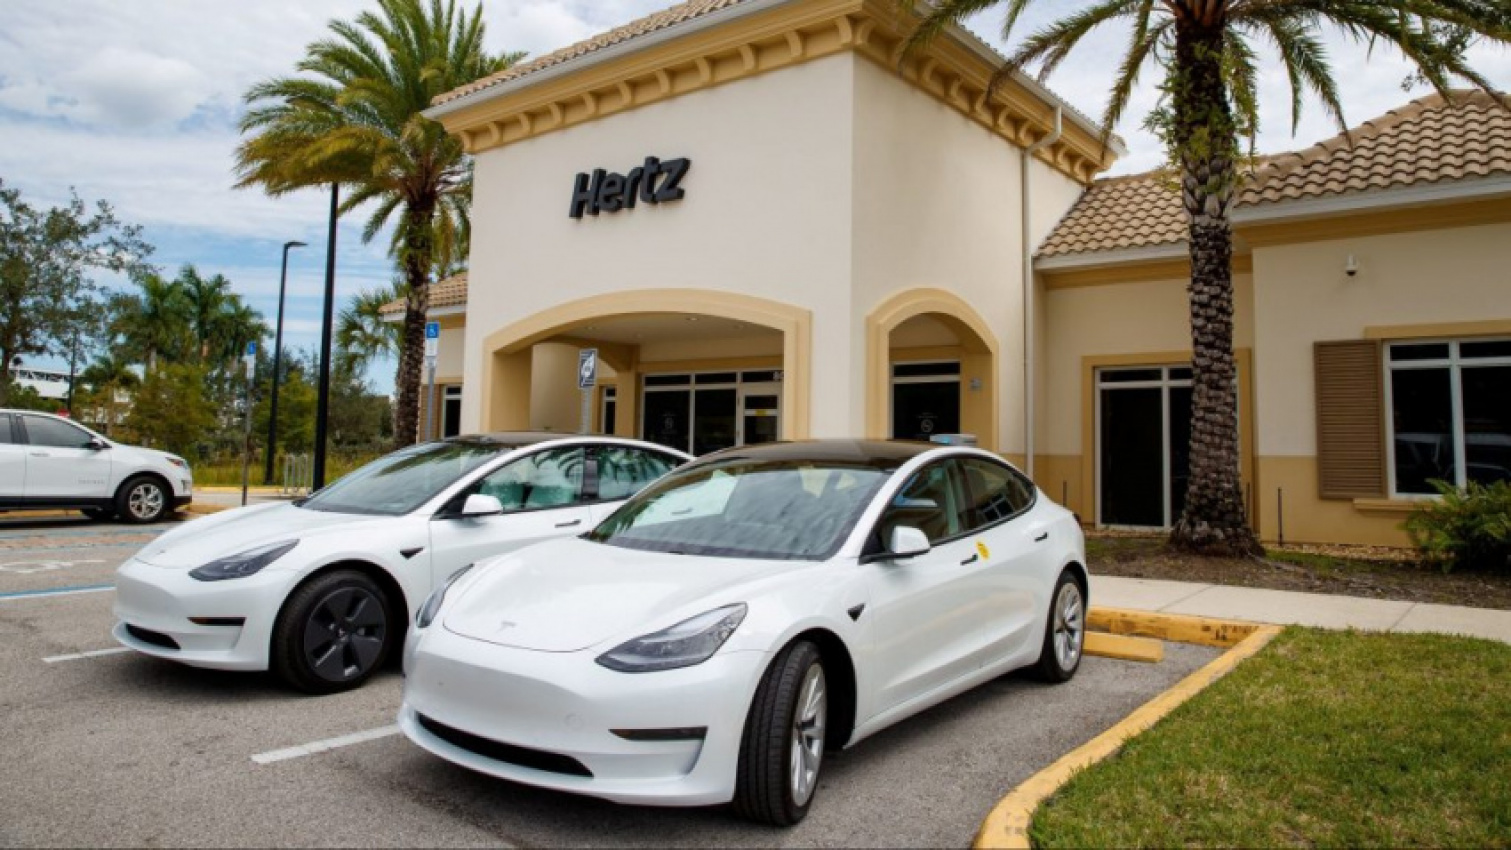 autos, cars, news, space, spacex, tesla, tesla model 3, hertz says it is ‘actively receiving’ tesla model 3 rental cars across the country